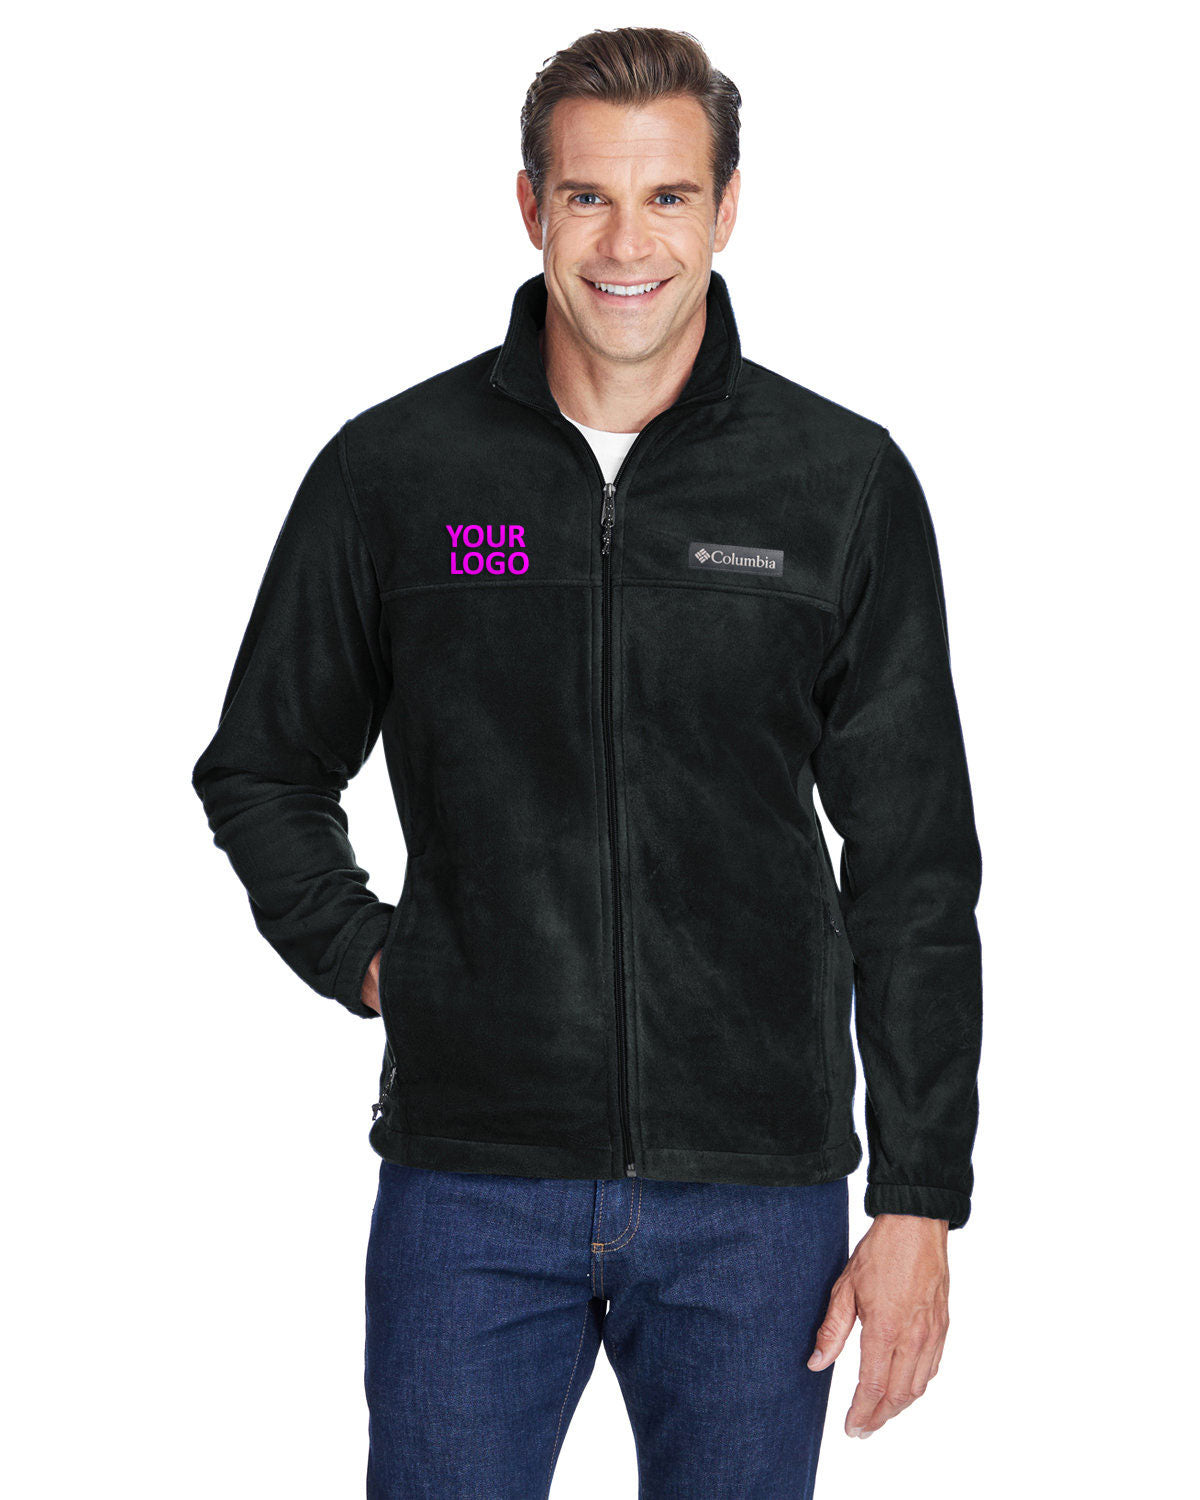 Columbia Black 3220 embroidered jackets for business